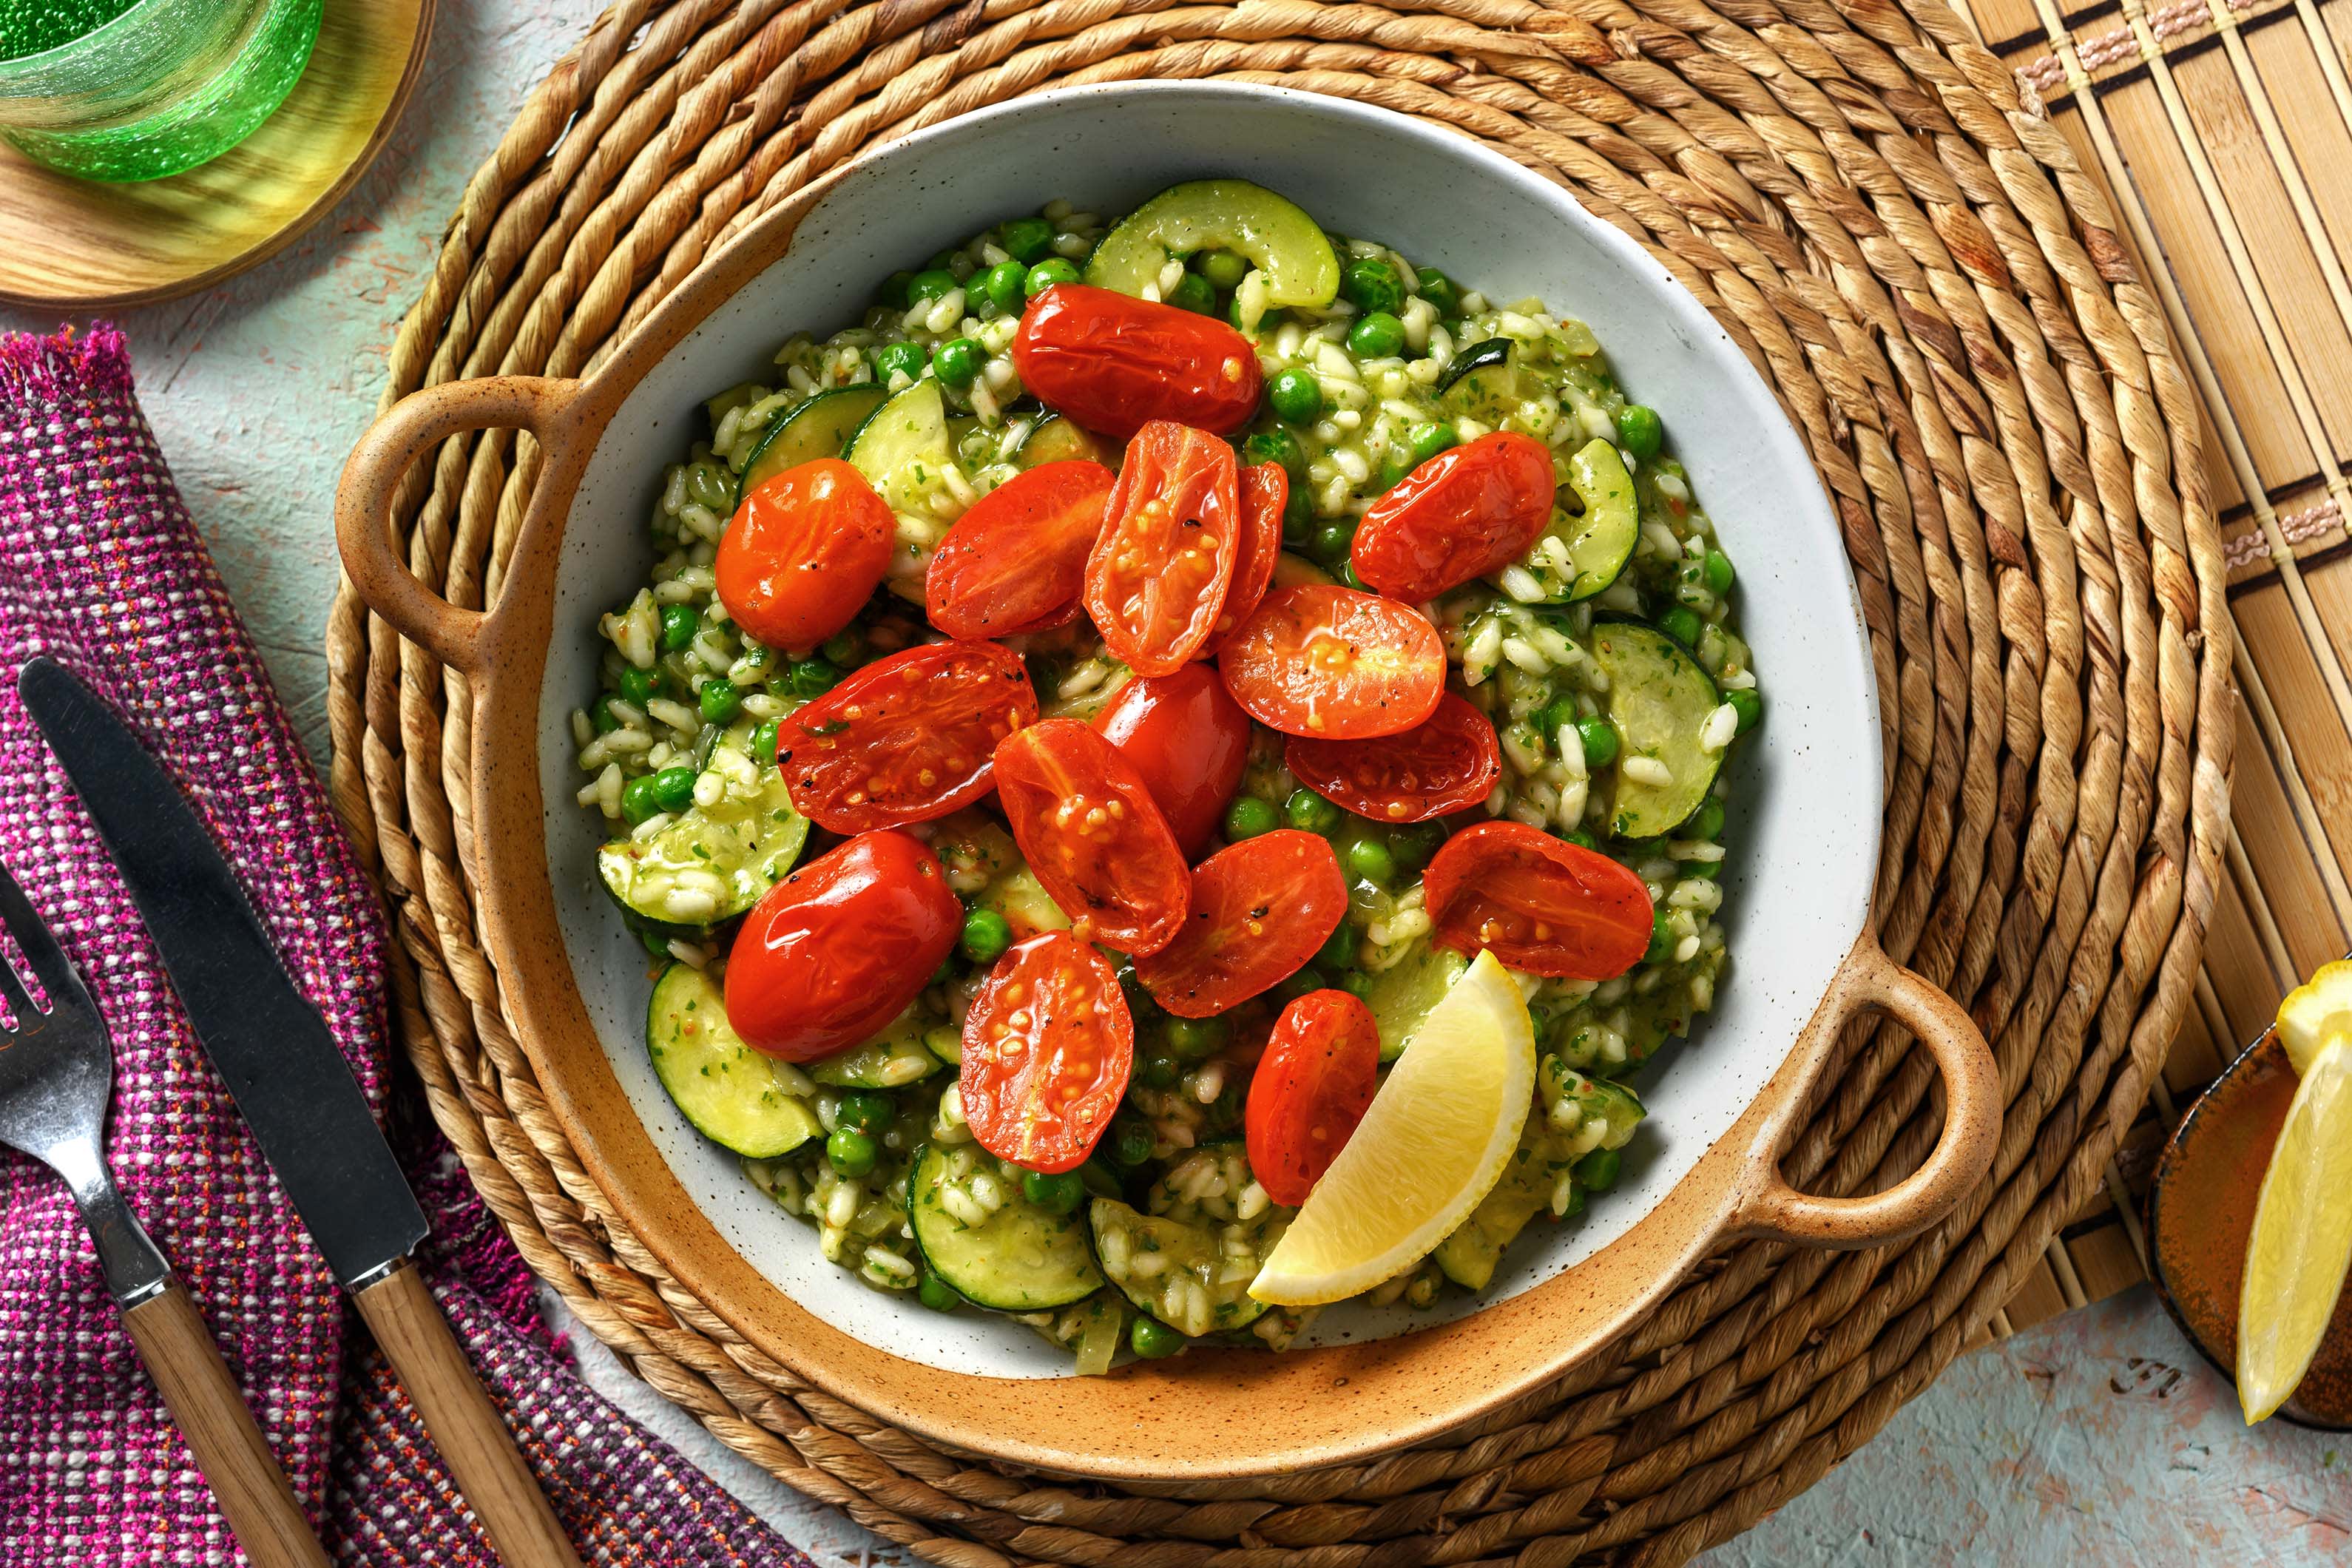  Oven Baked Pesto Risotto